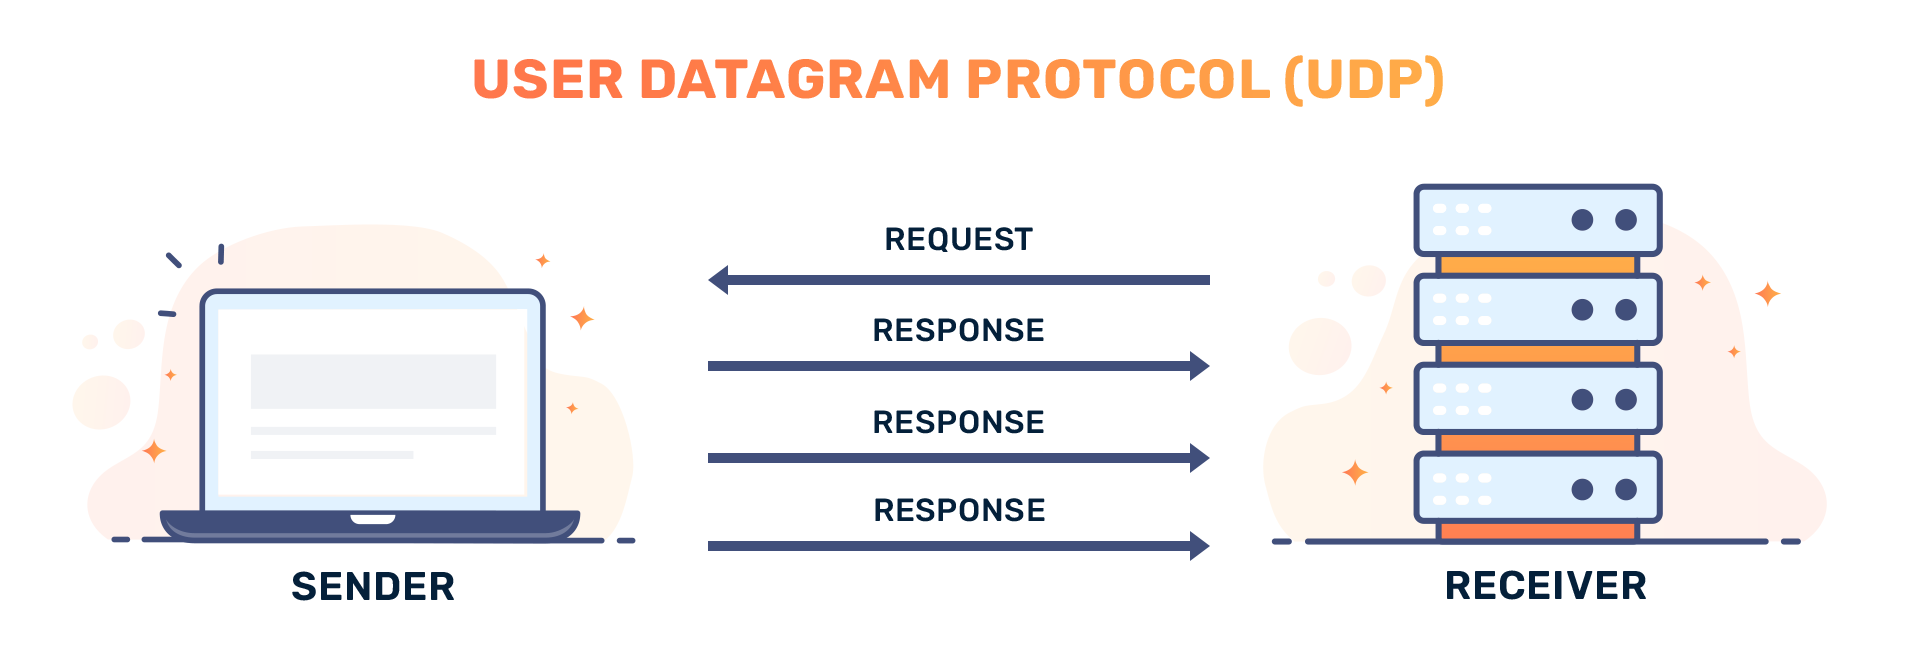 What Is User Datagram Protocol (UDP) and how does it work